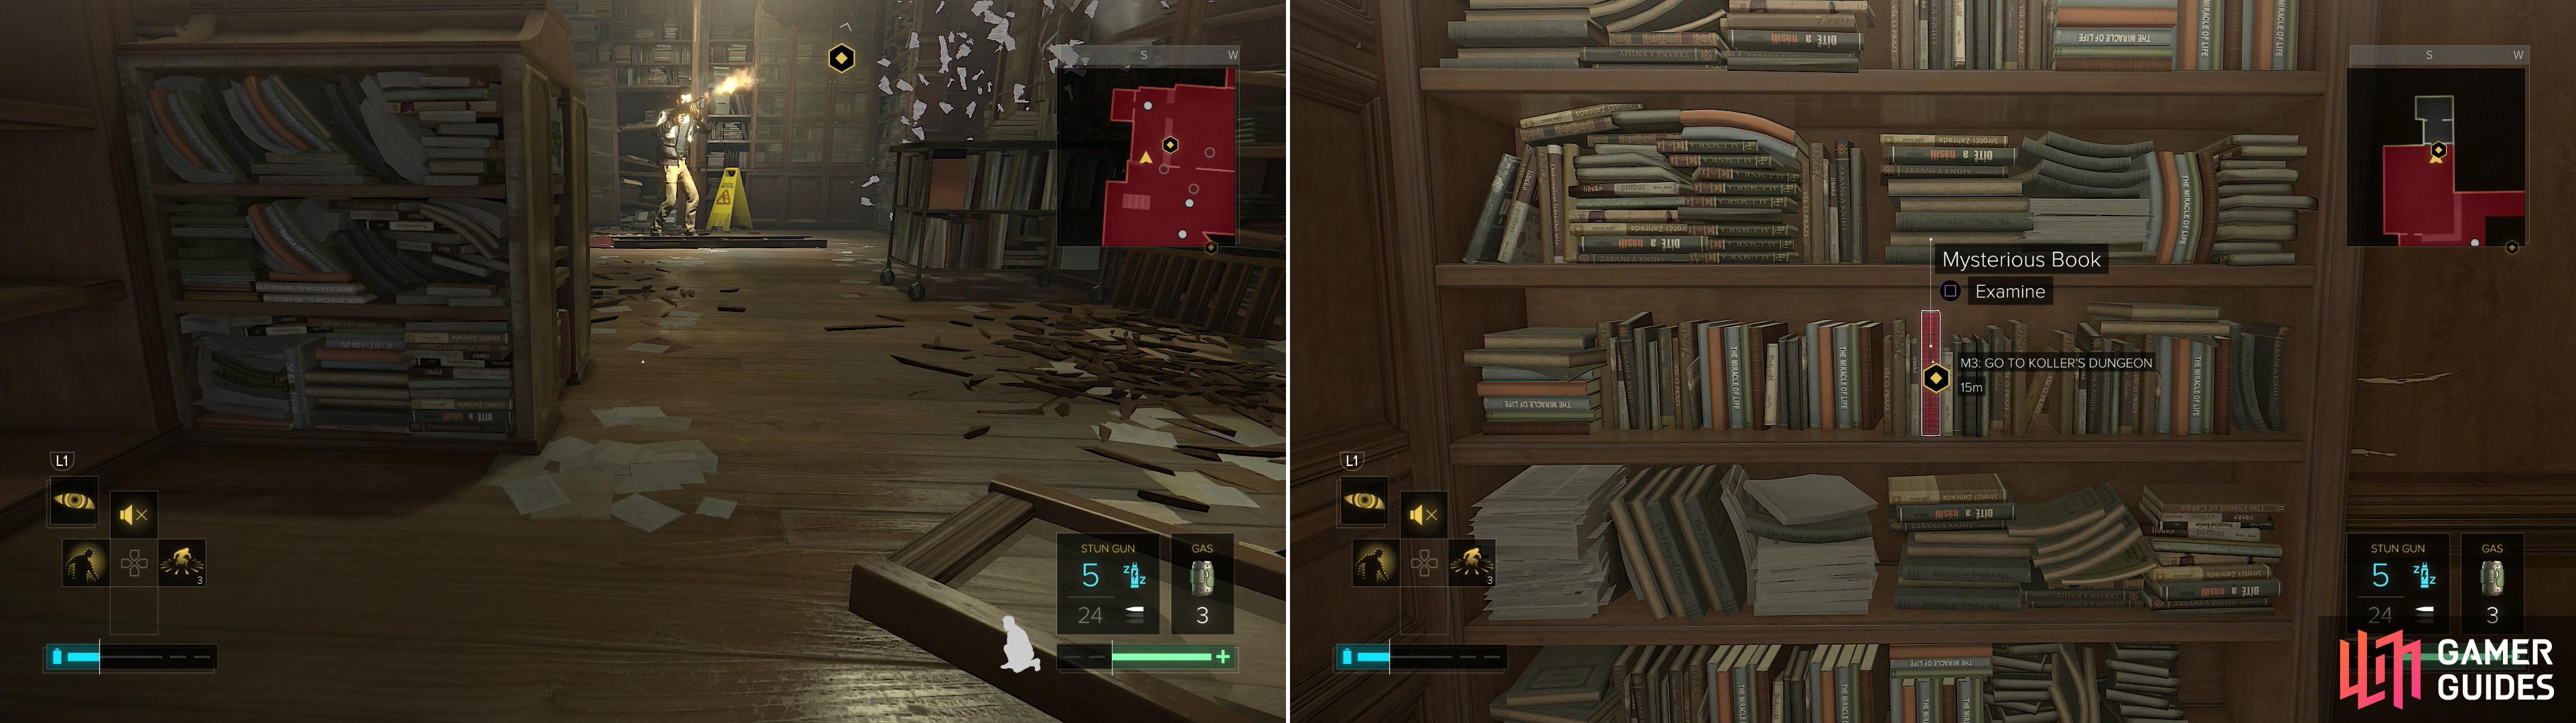 The Dvali Thugs are busy vandalizing The Time Machine, giving you a chance to sneak past (left). Examine the red book in Koller's office to find a way into his lair (right).